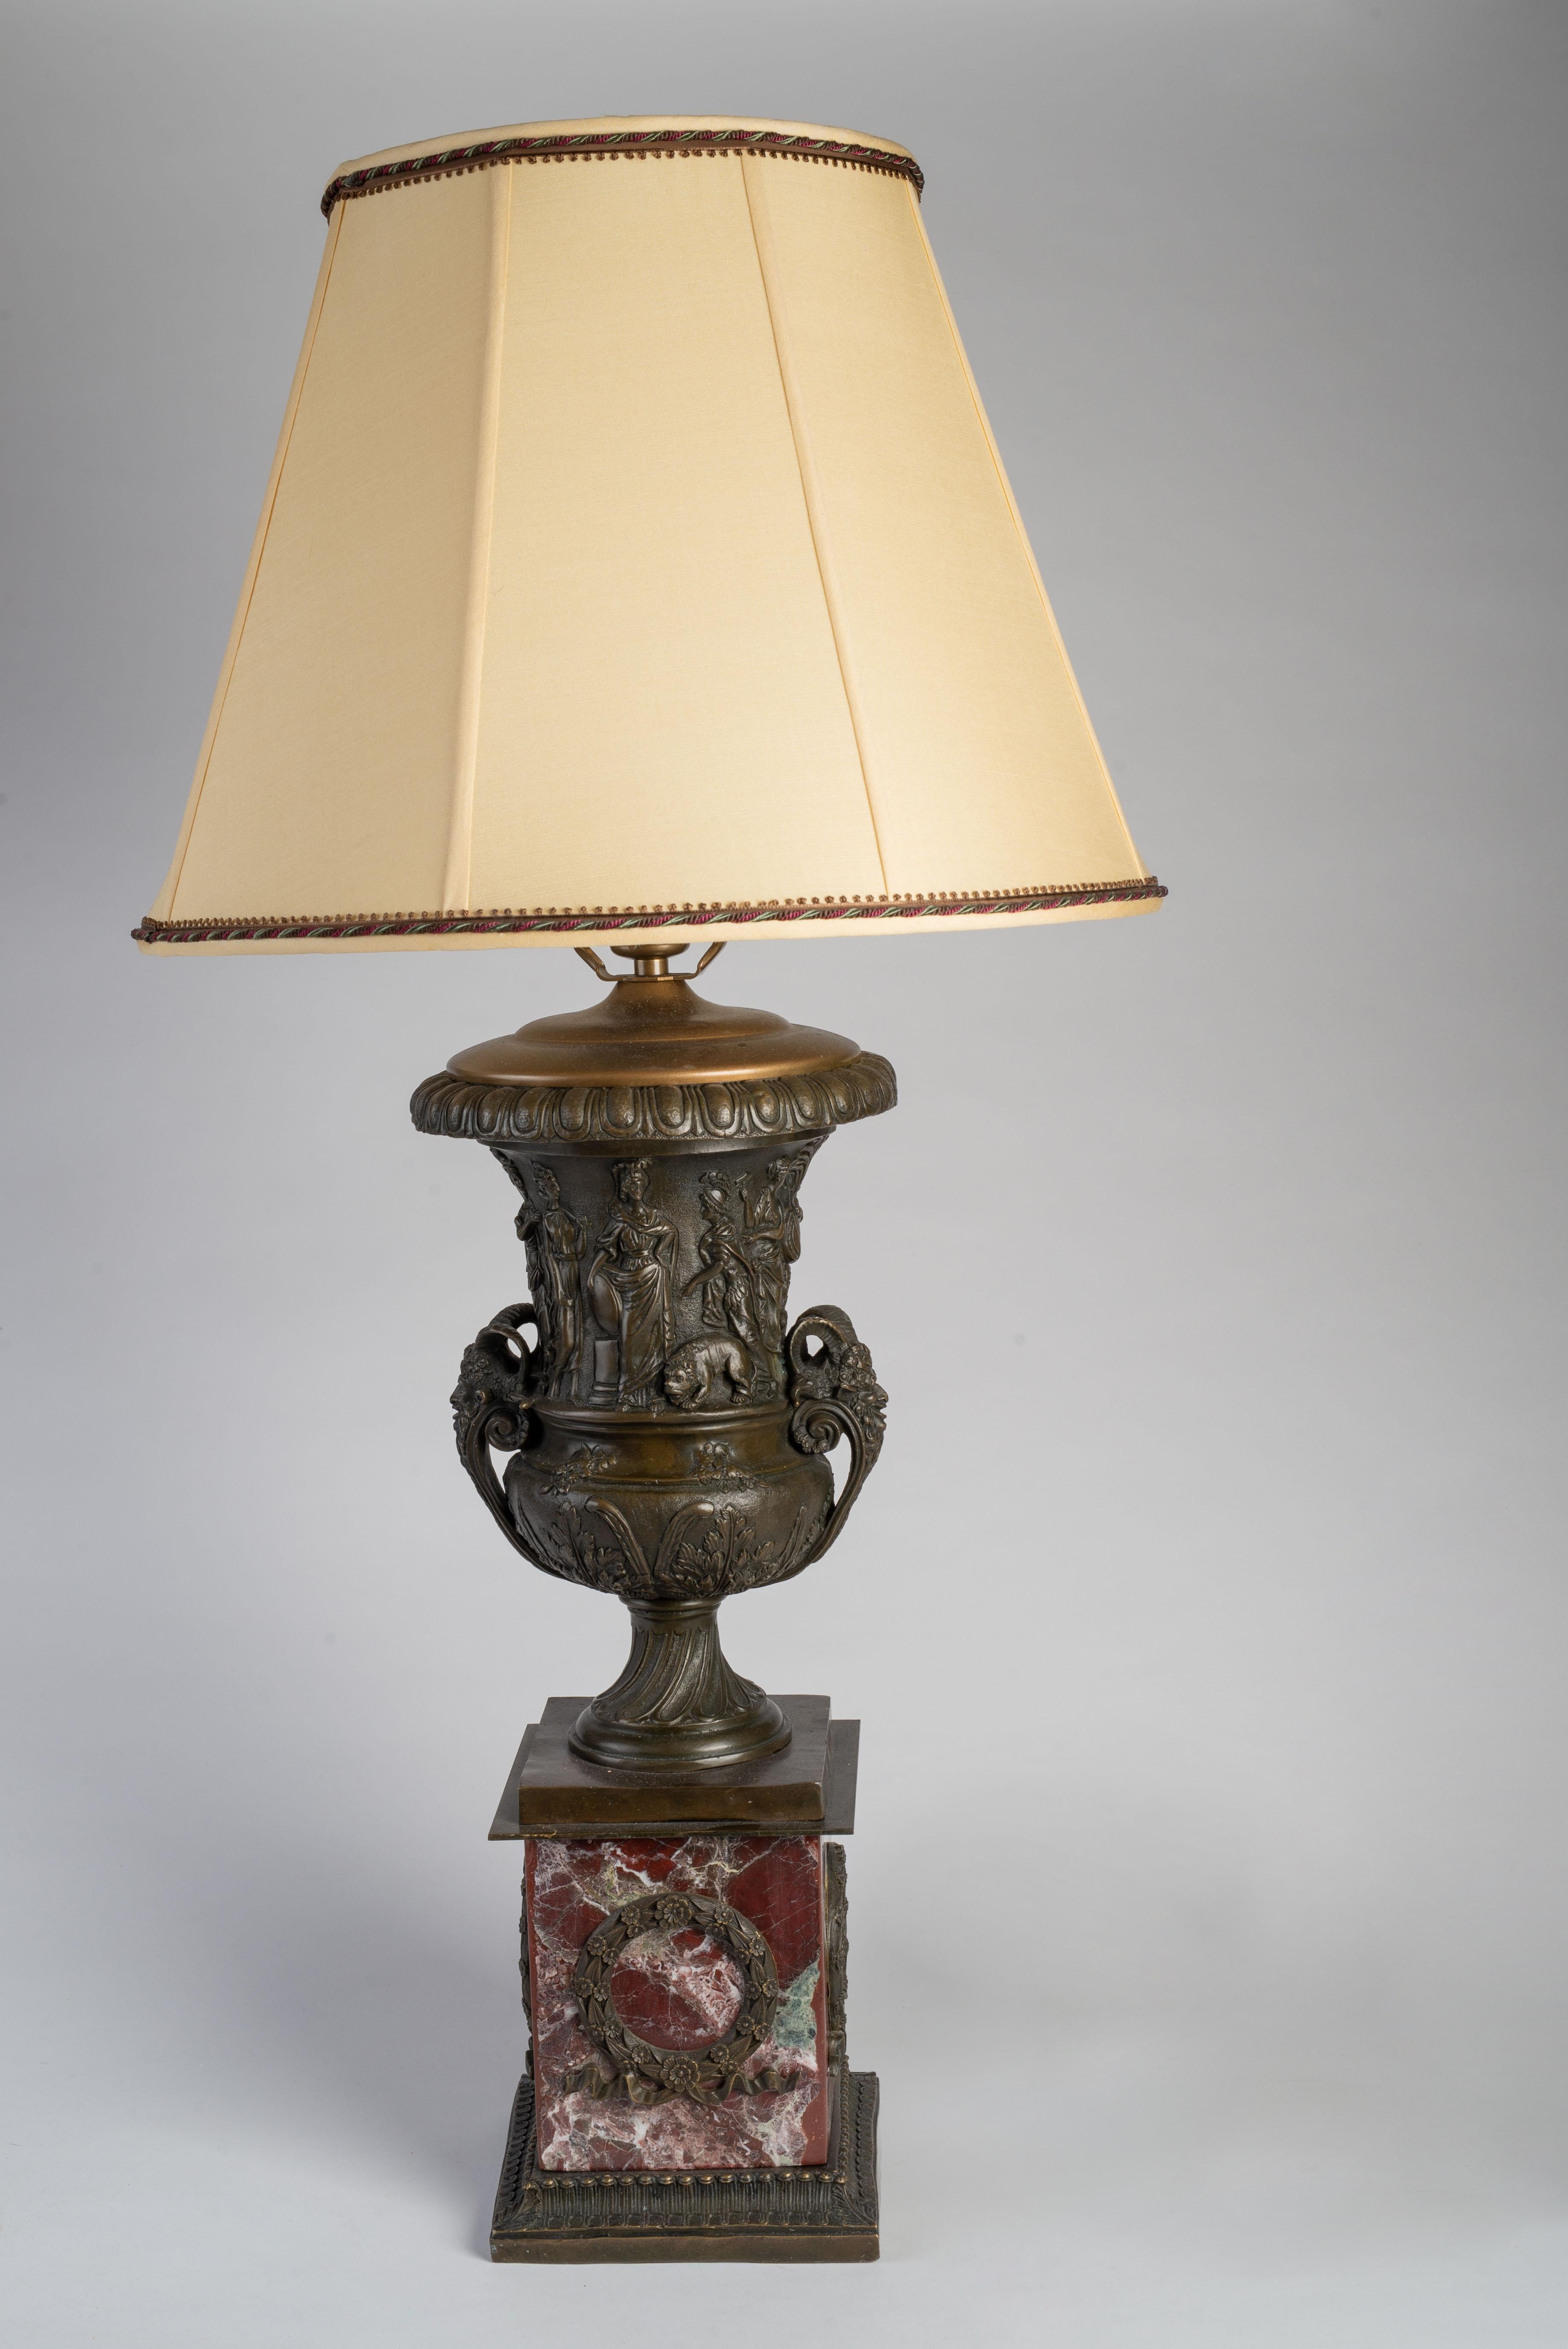 Each urn cast with frieze of classical figures, raised on a bronze-mounted rouge griotte square marble base. The lampshades are silk and custom made by Blanche Field.

Dimensions include lampshade. The height of the base only (urn on marble stand)